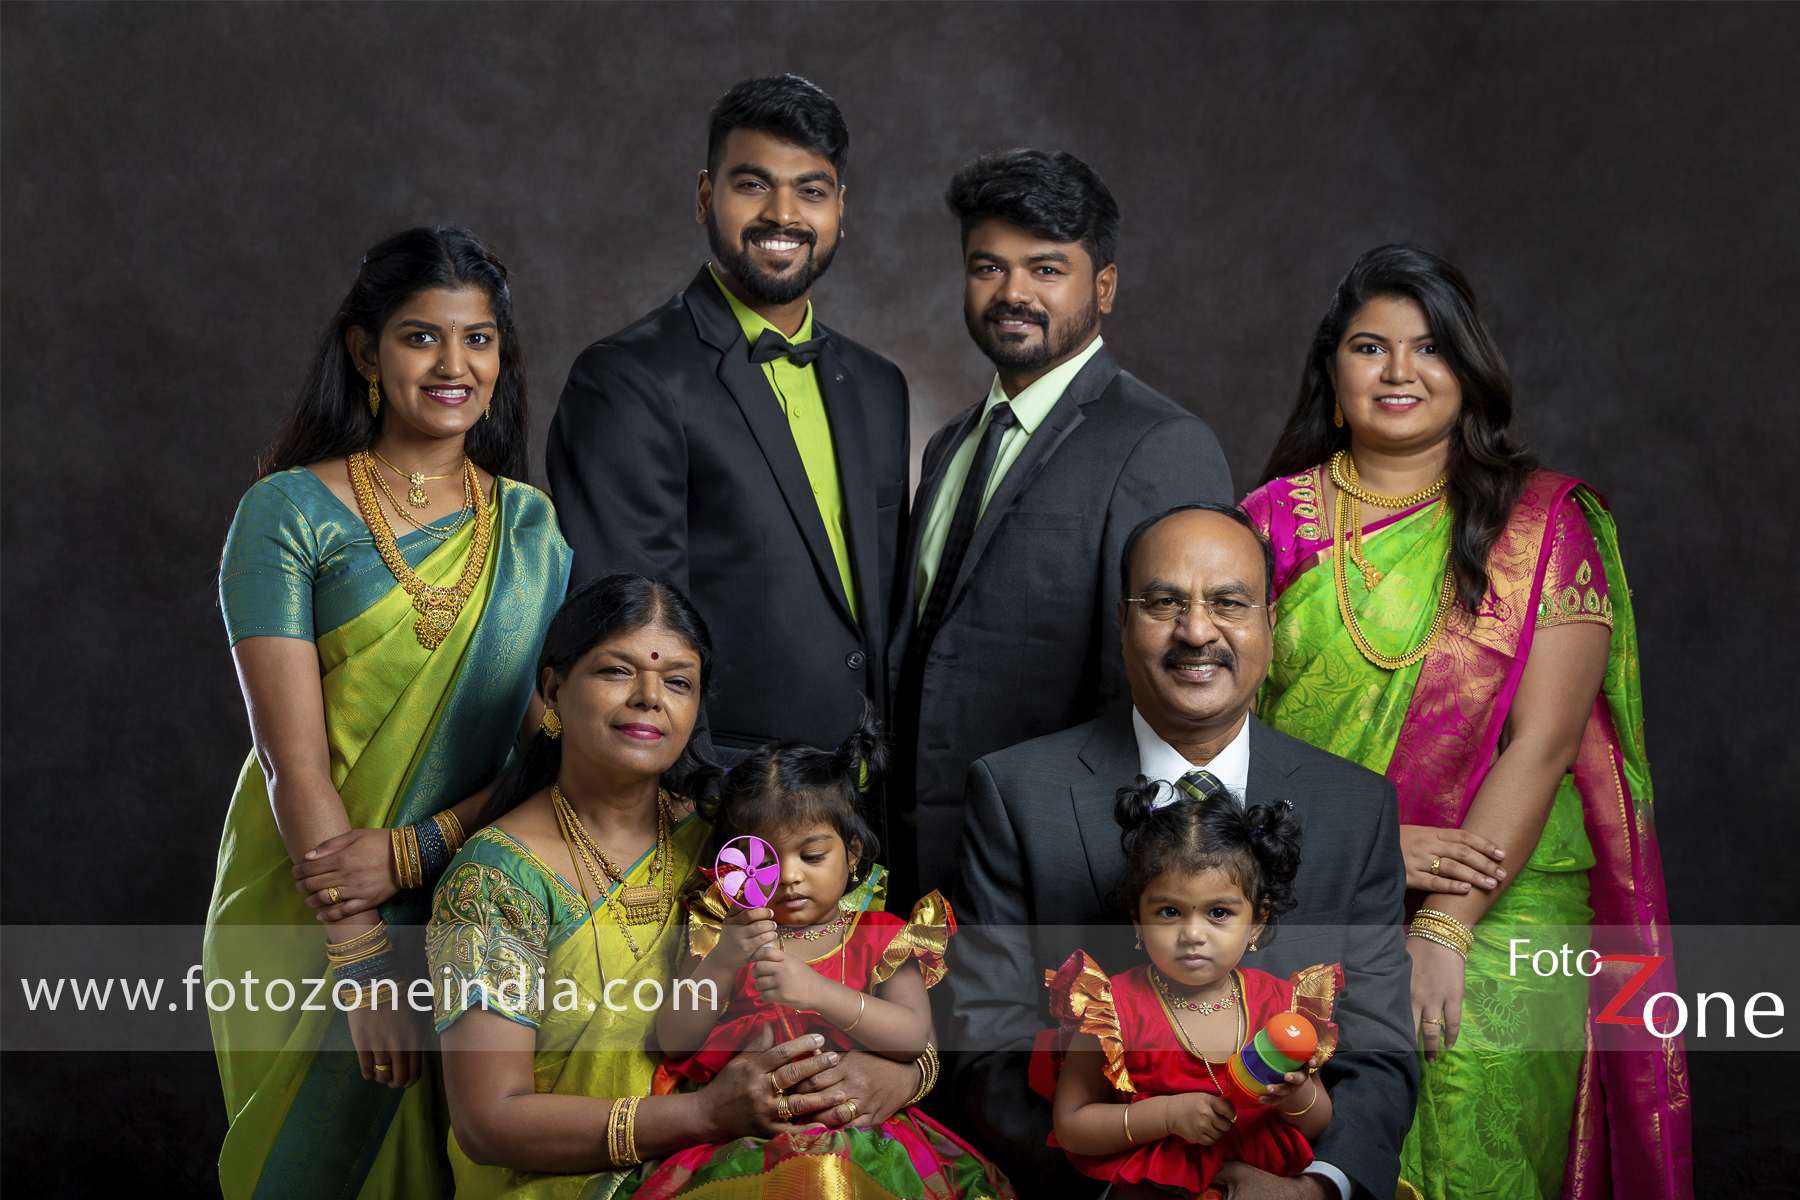 Vinus Images - Family photoshoot and Potraits in Delhi NCR